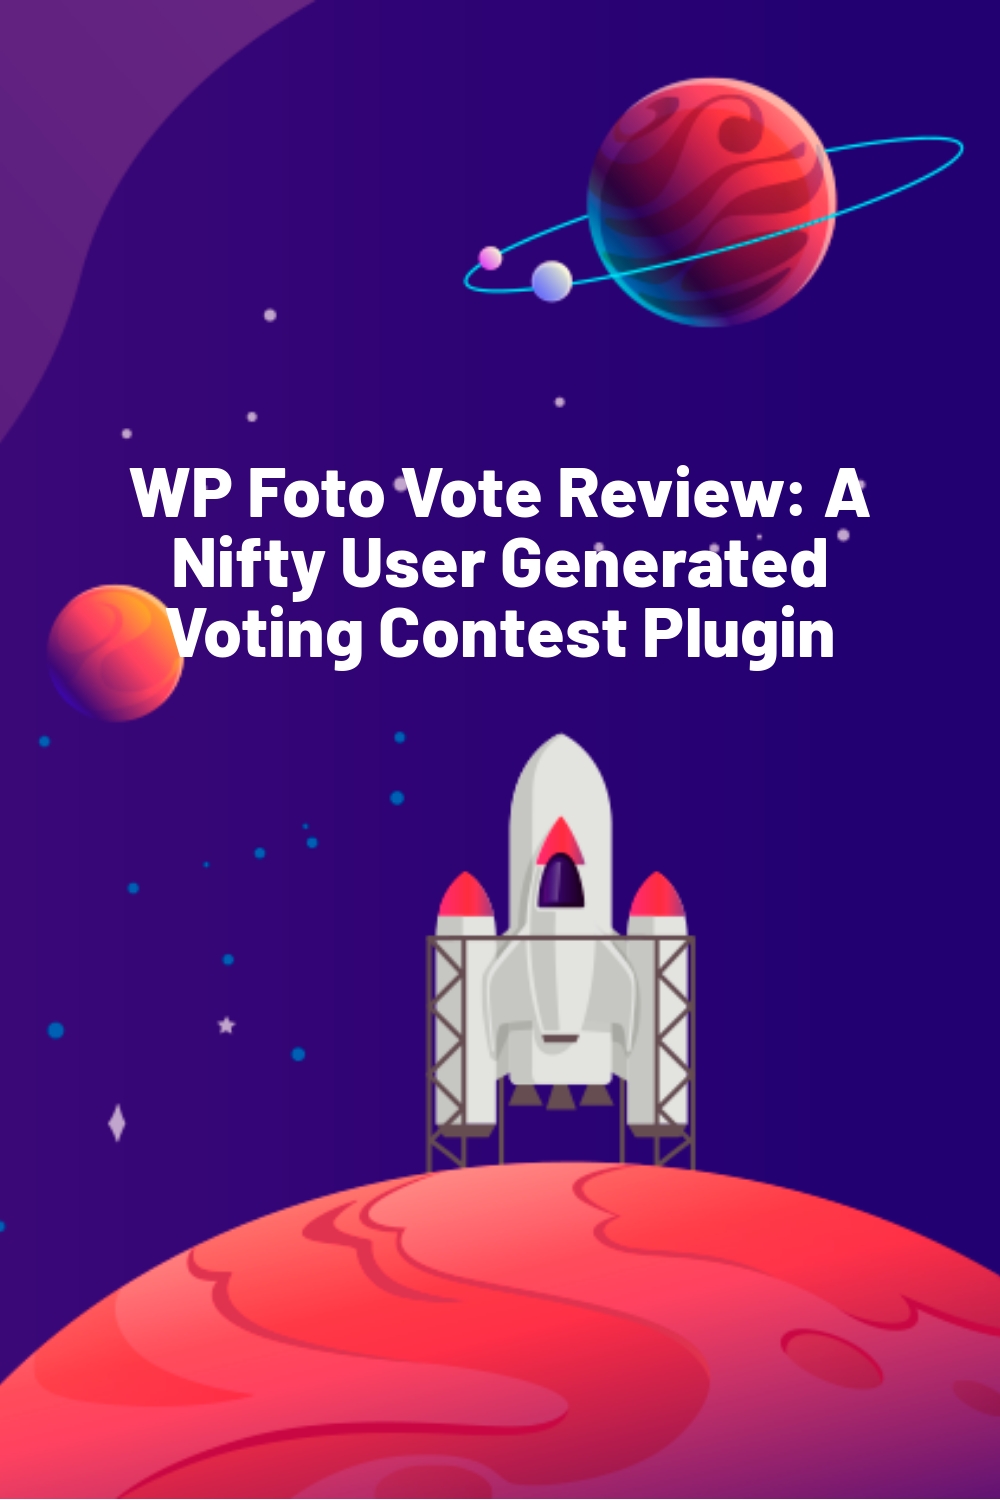 WP Foto Vote Review: A Nifty User Generated Voting Contest Plugin